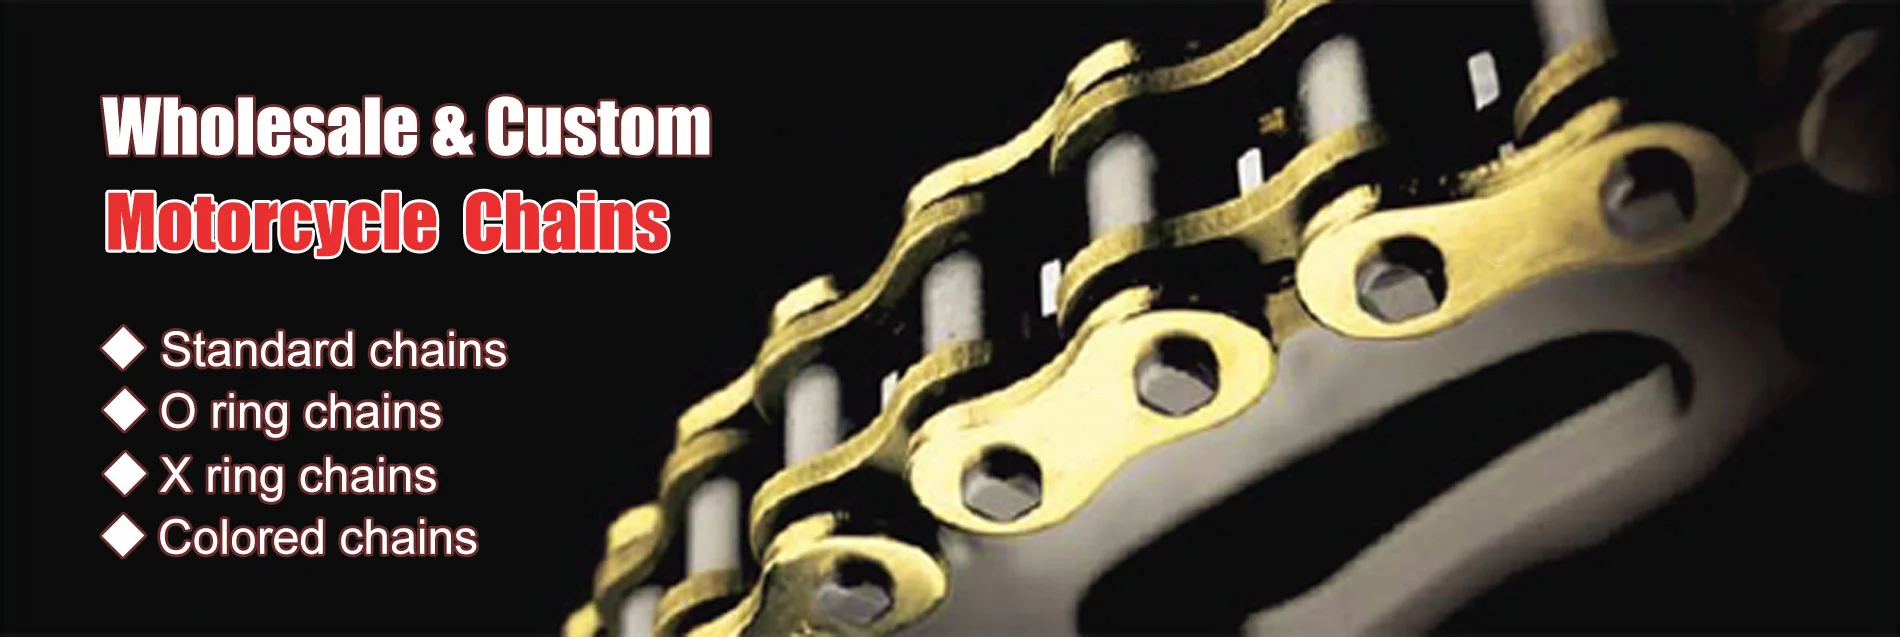 Motorcycle chains  /  X ring chains